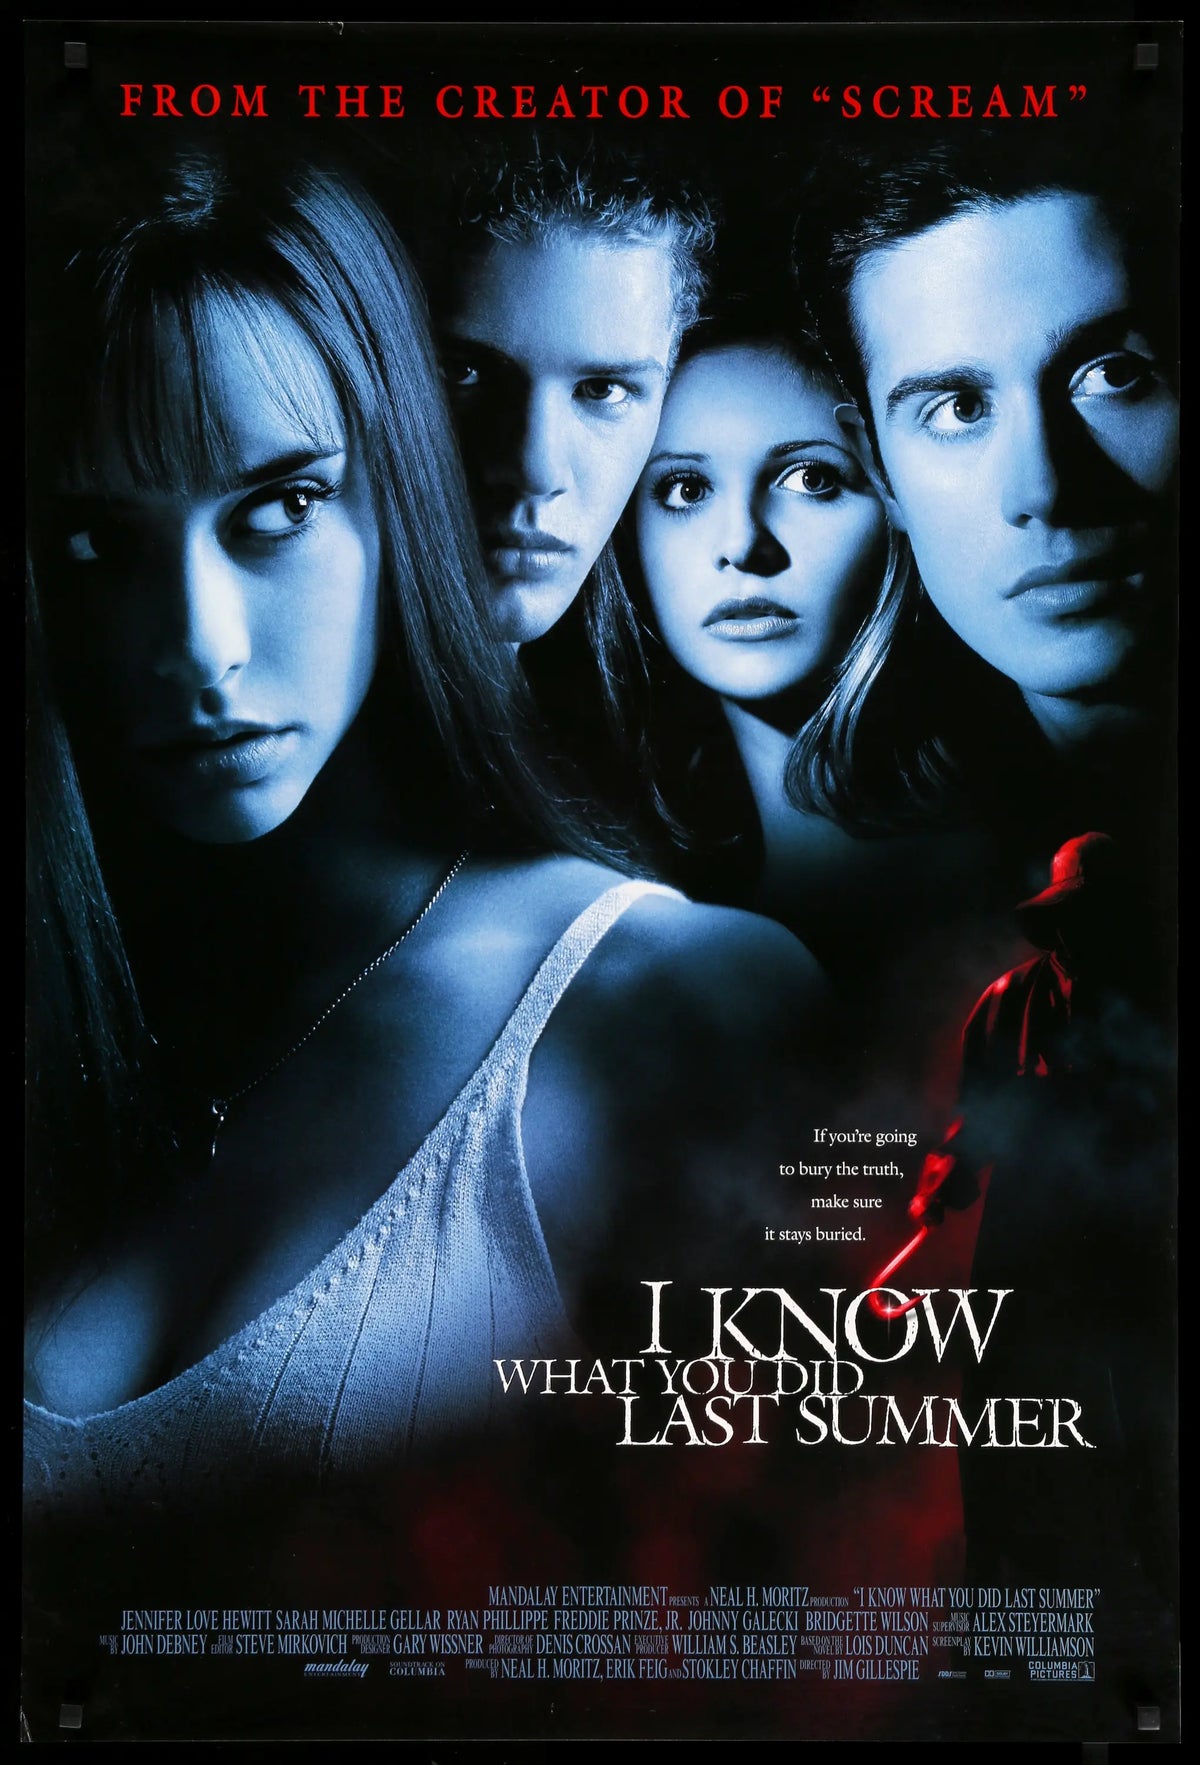 I Know What You Did Last Summer (1997) original movie poster for sale at Original Film Art